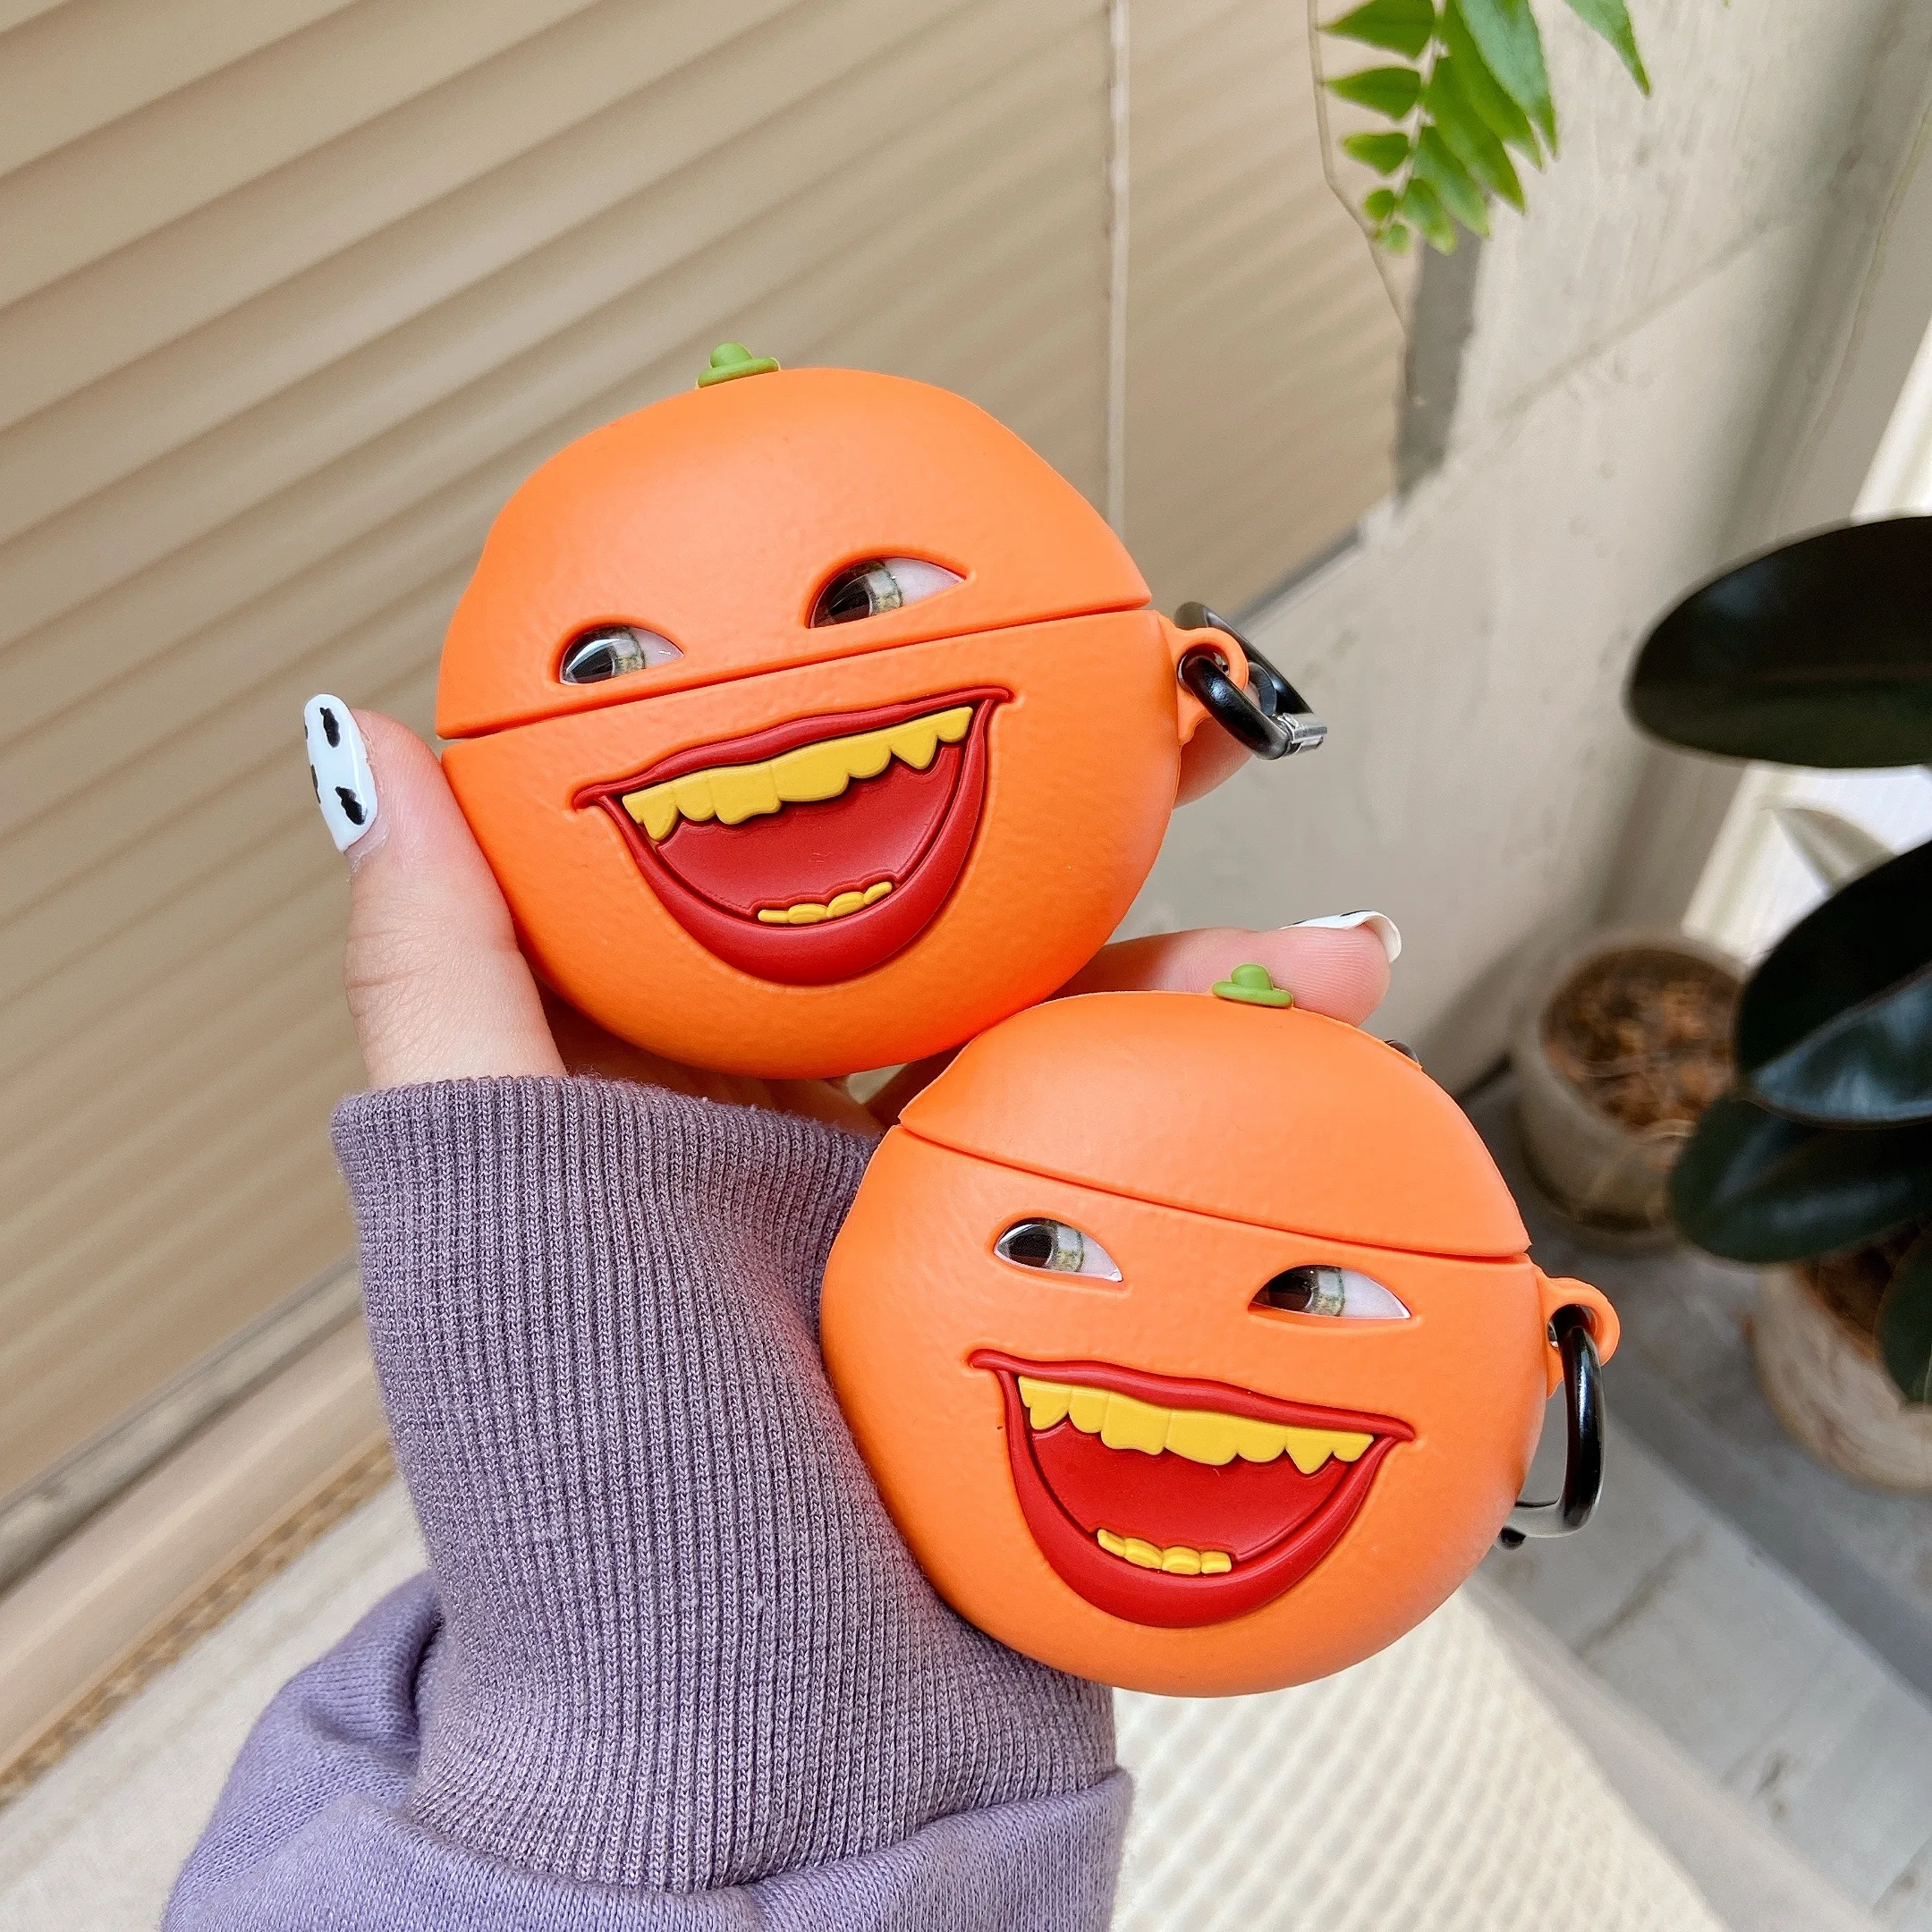 

3D Cute Cartoon Annoying Orange Earphones Covers For Air Pod For Apple Airpods Pro 1 2 Cases